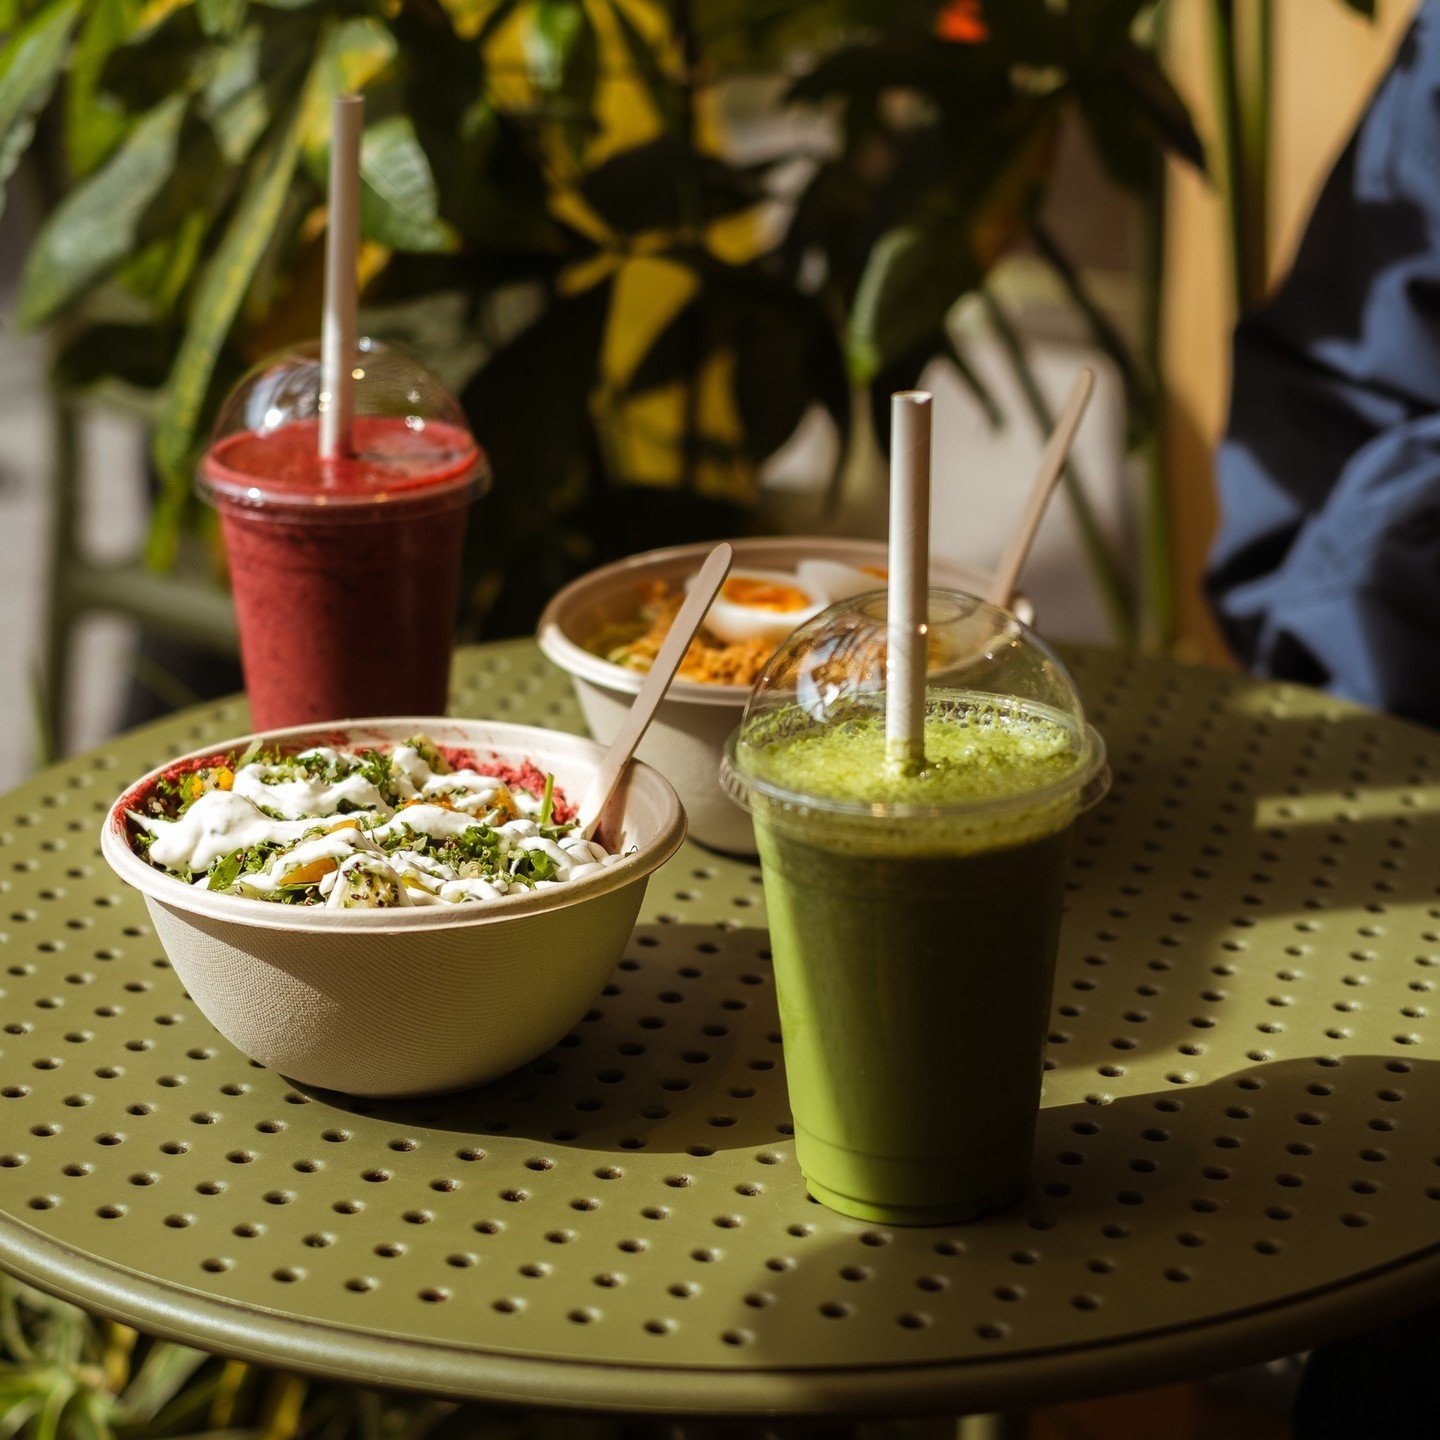 Introducing @bewliehill's newest seasonal bowls for May! 🍃

Kickstart your day with a refreshing selection of crispy salads, nutritious smoothies, or fruit-packed juices. Enjoy a burst of flavour and energy to fuel your day ahead.